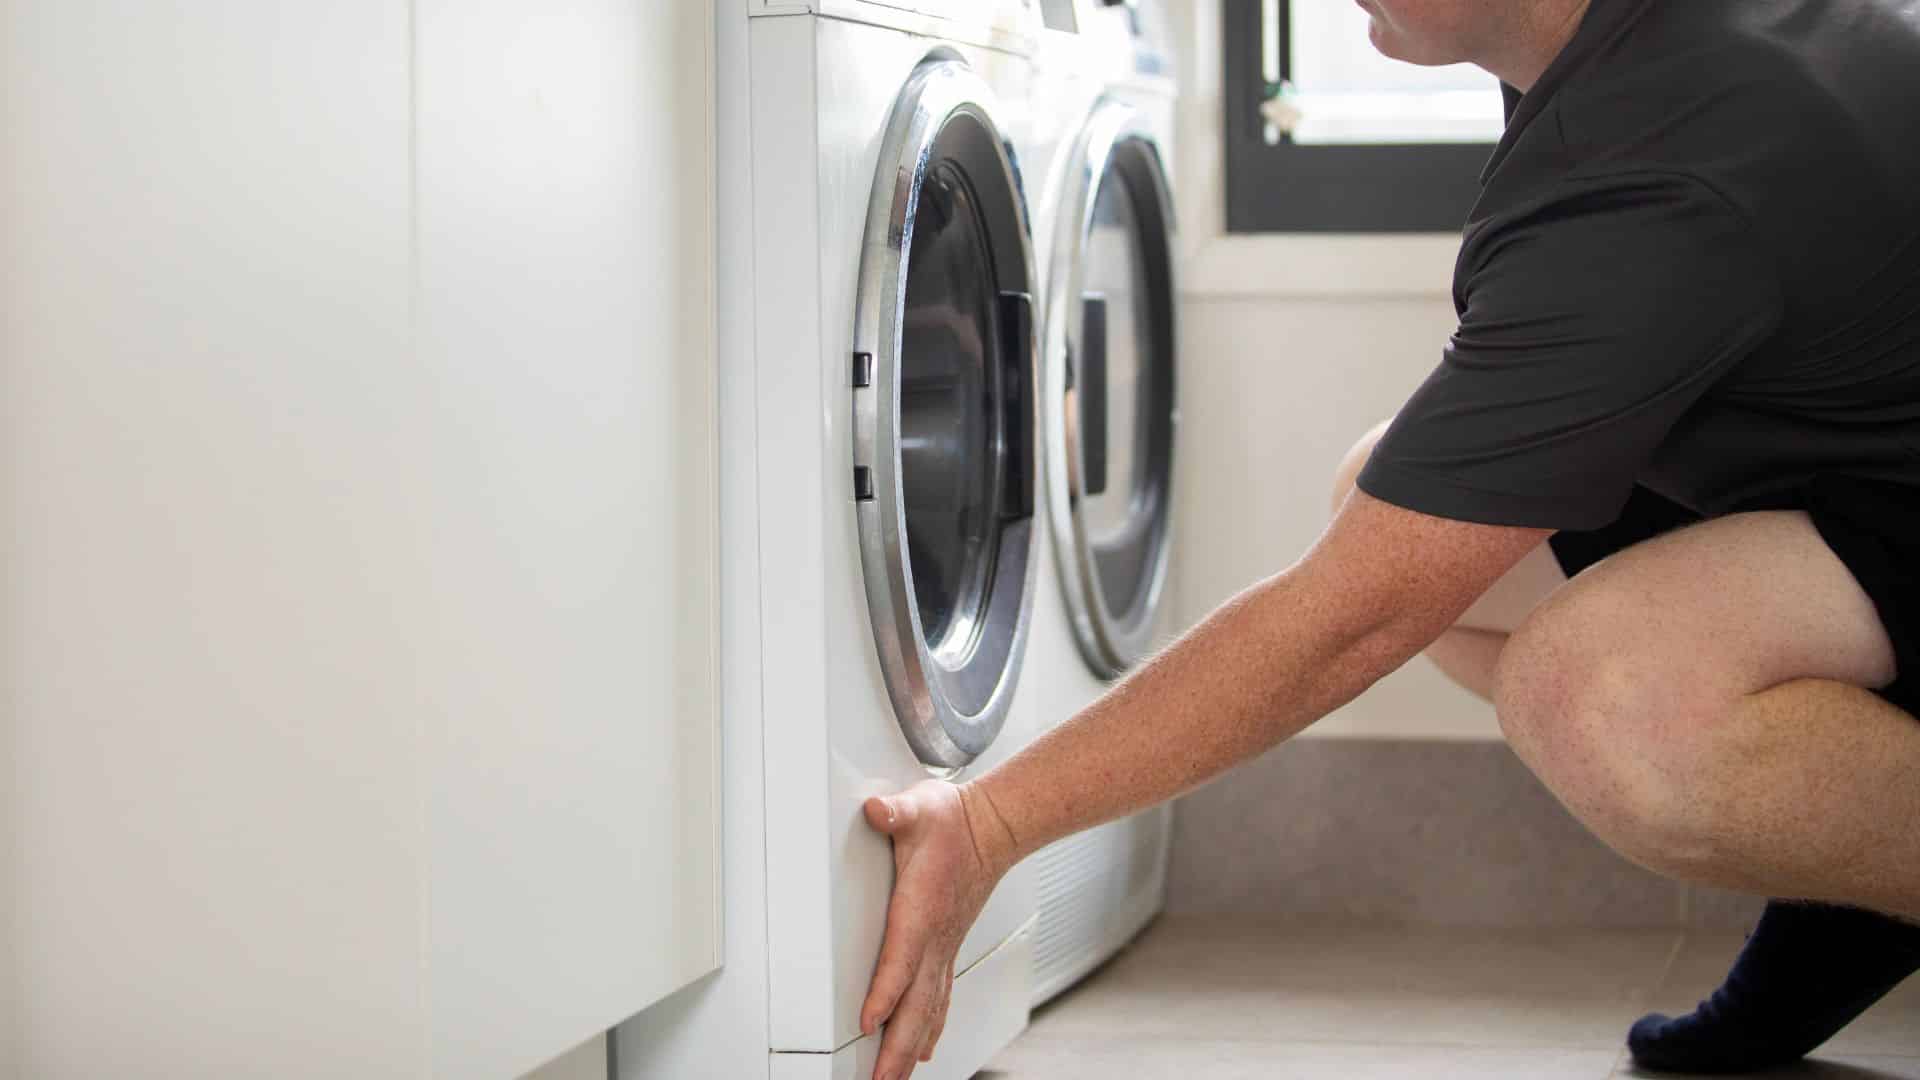 What You Need to Know About Laundry Room Sink Clogs